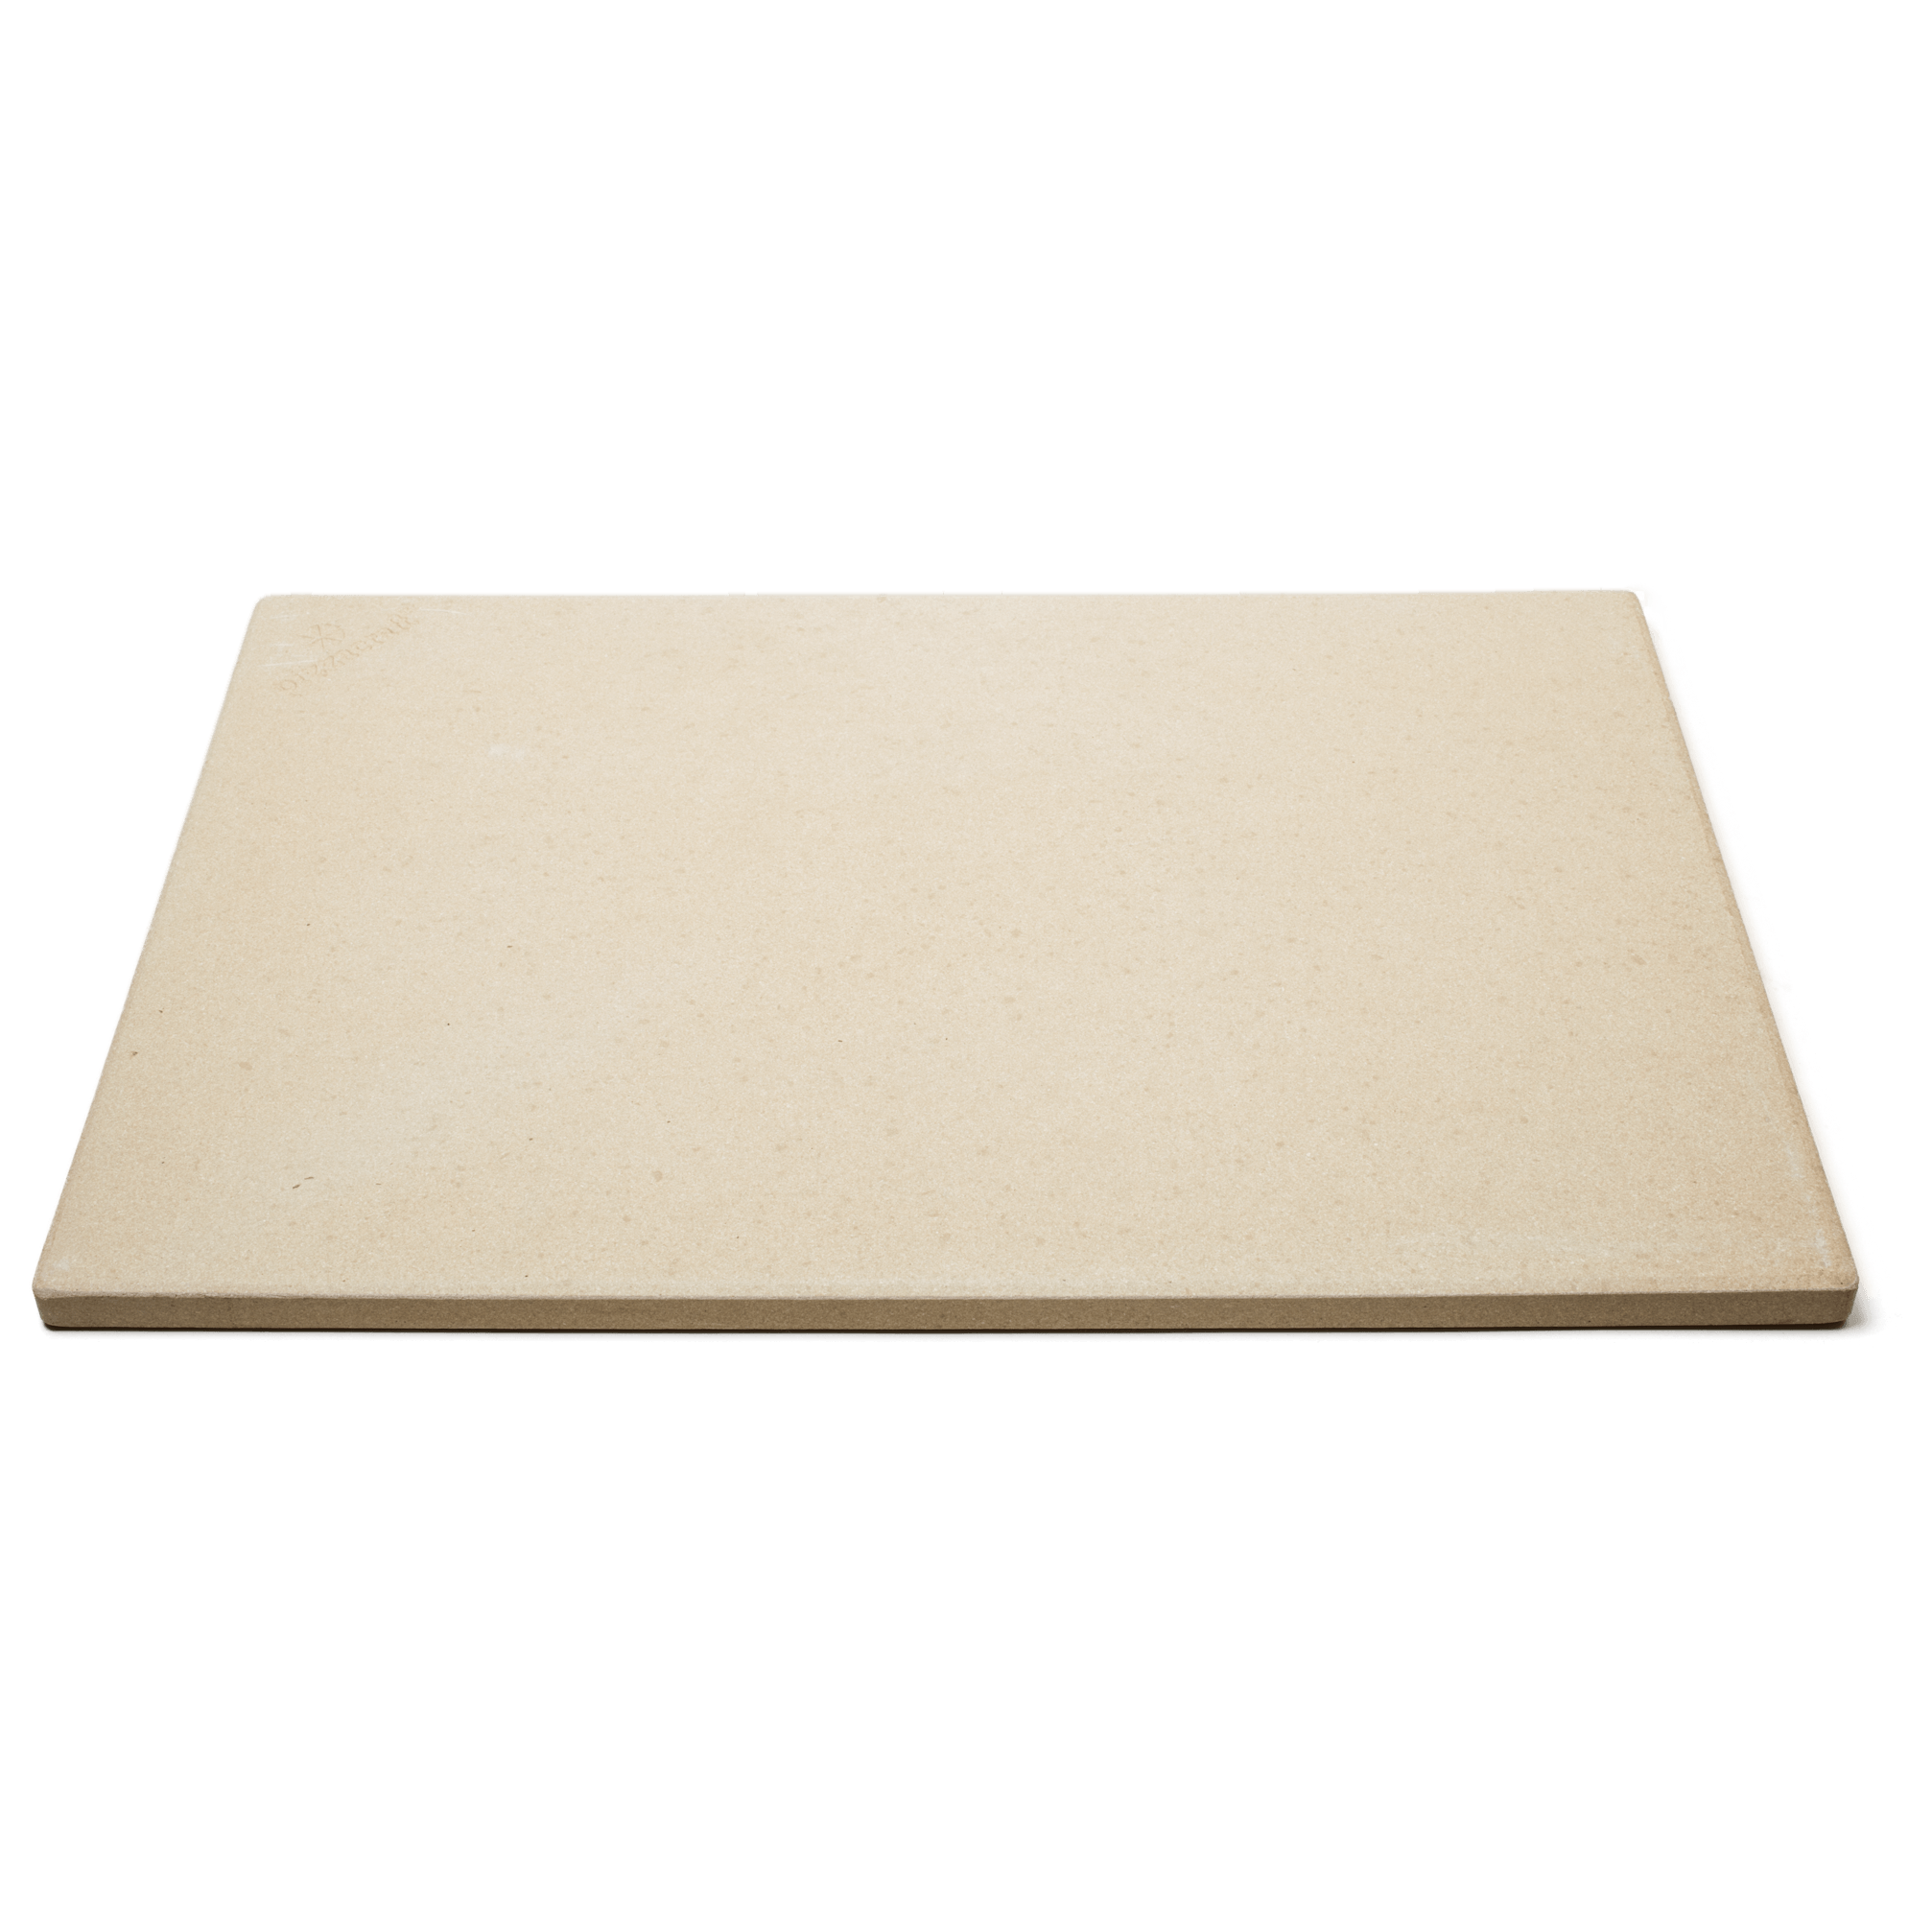 https://res.cloudinary.com/hksqkdlah/image/upload/32452_sil-pizza-stone-pizzacraft-all-purpose-baking-stone-pc0102.png